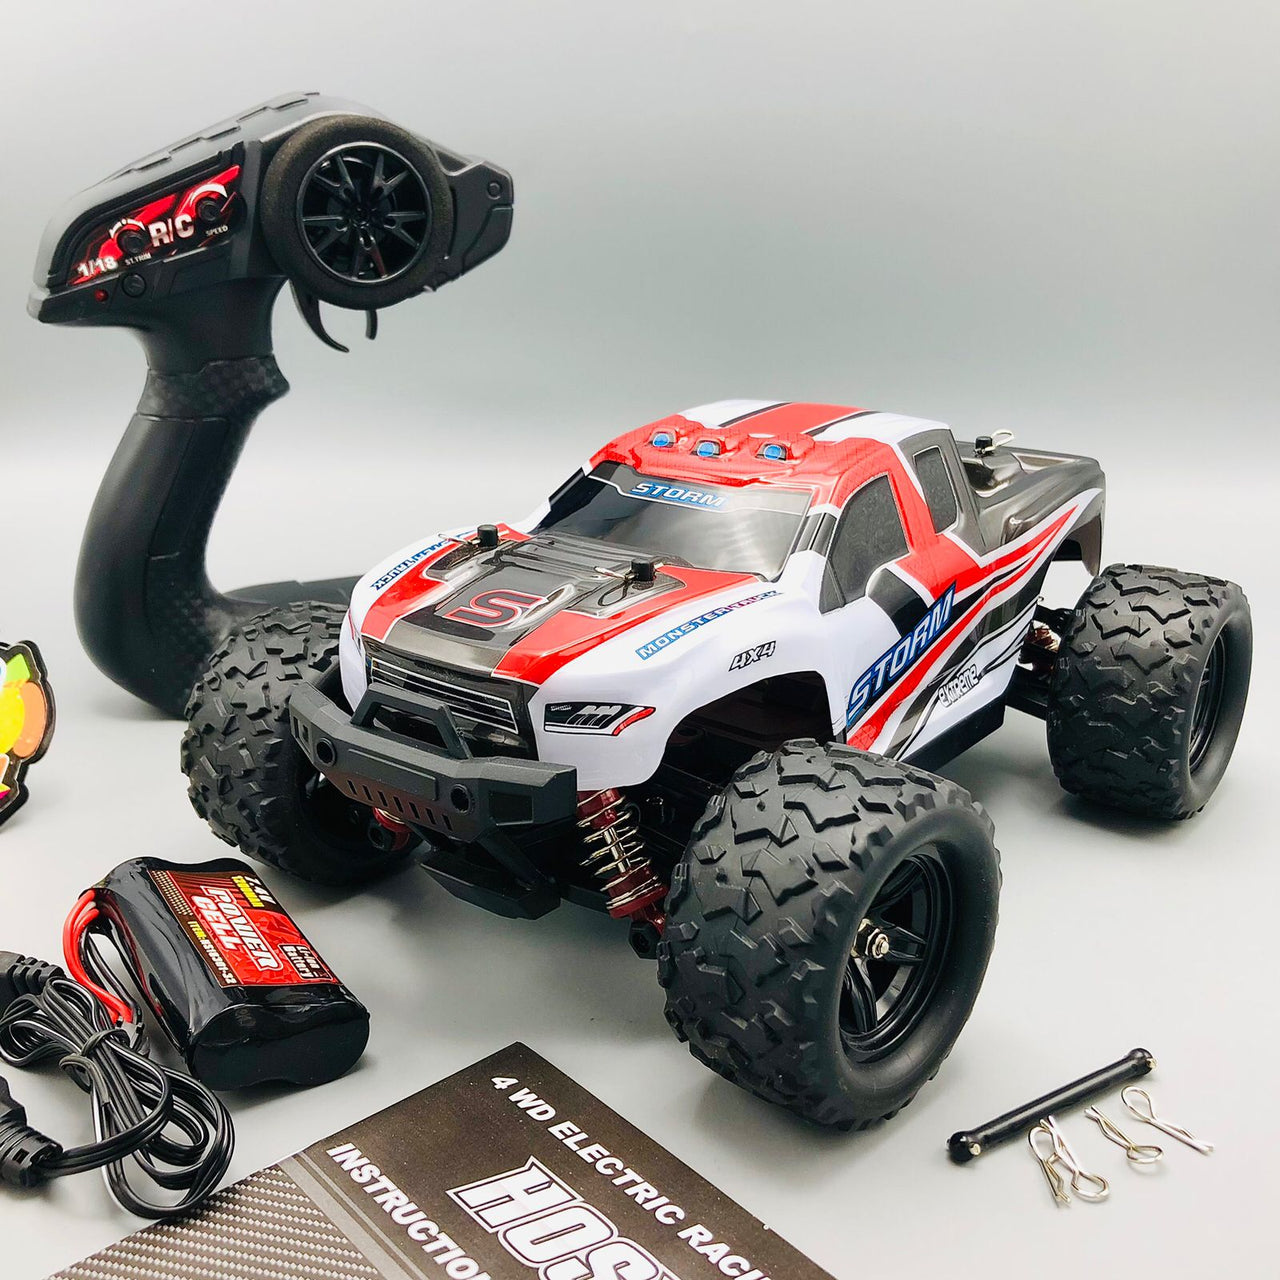 1:18 RC 2.4GHz Off-Road Storm Truck